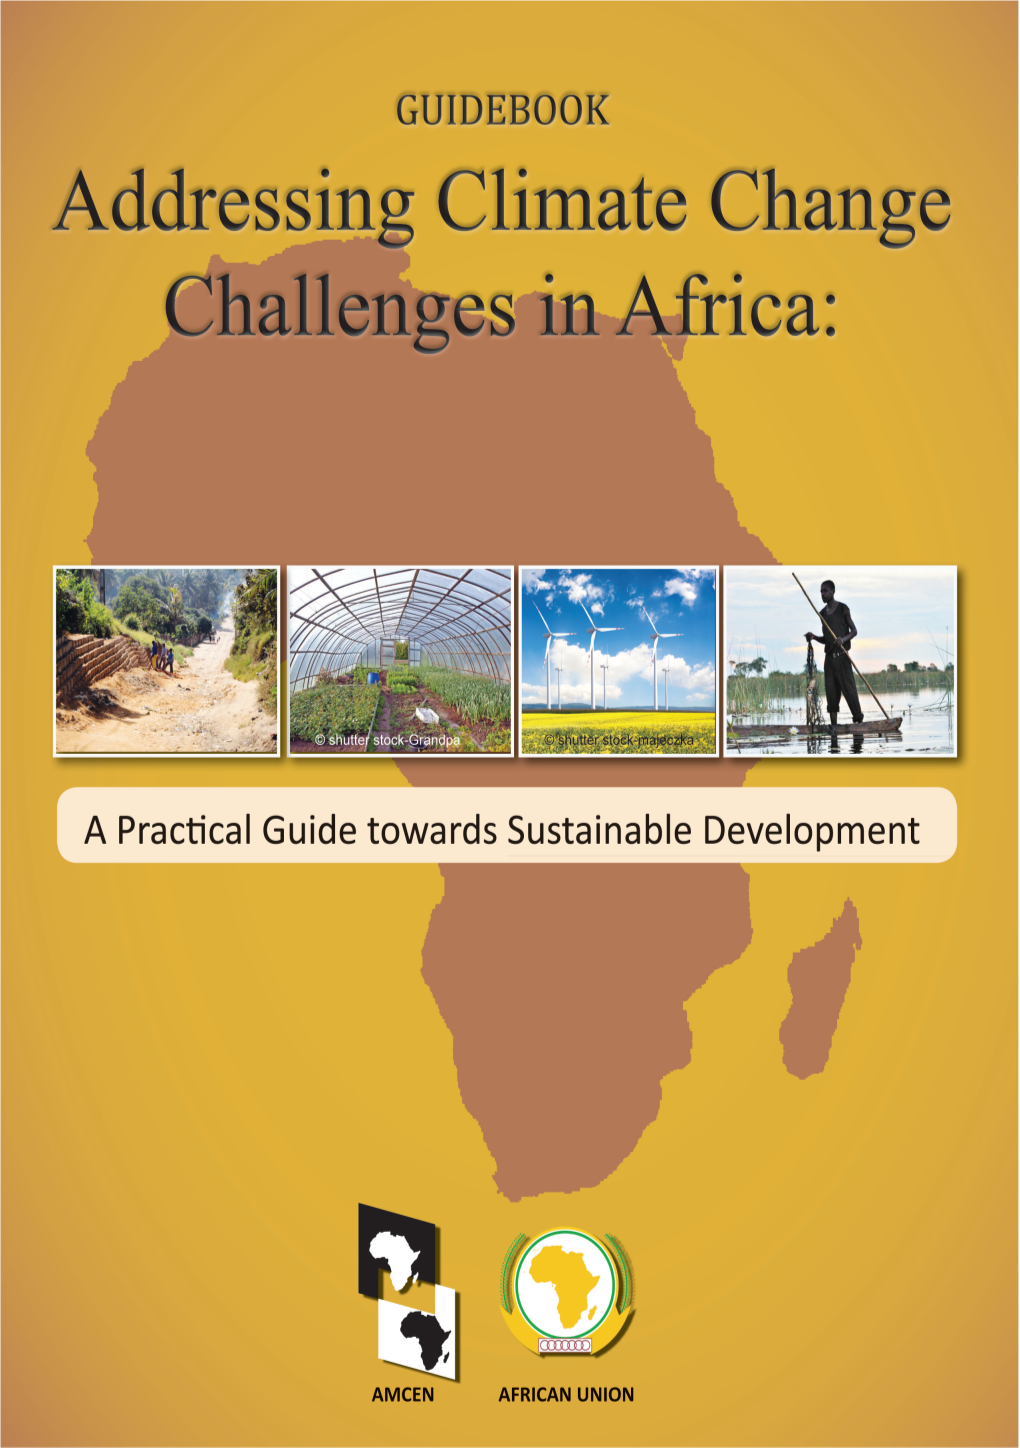 AMCEN/African Union : Guidebook Addressing Climate Change Challenges in Africa